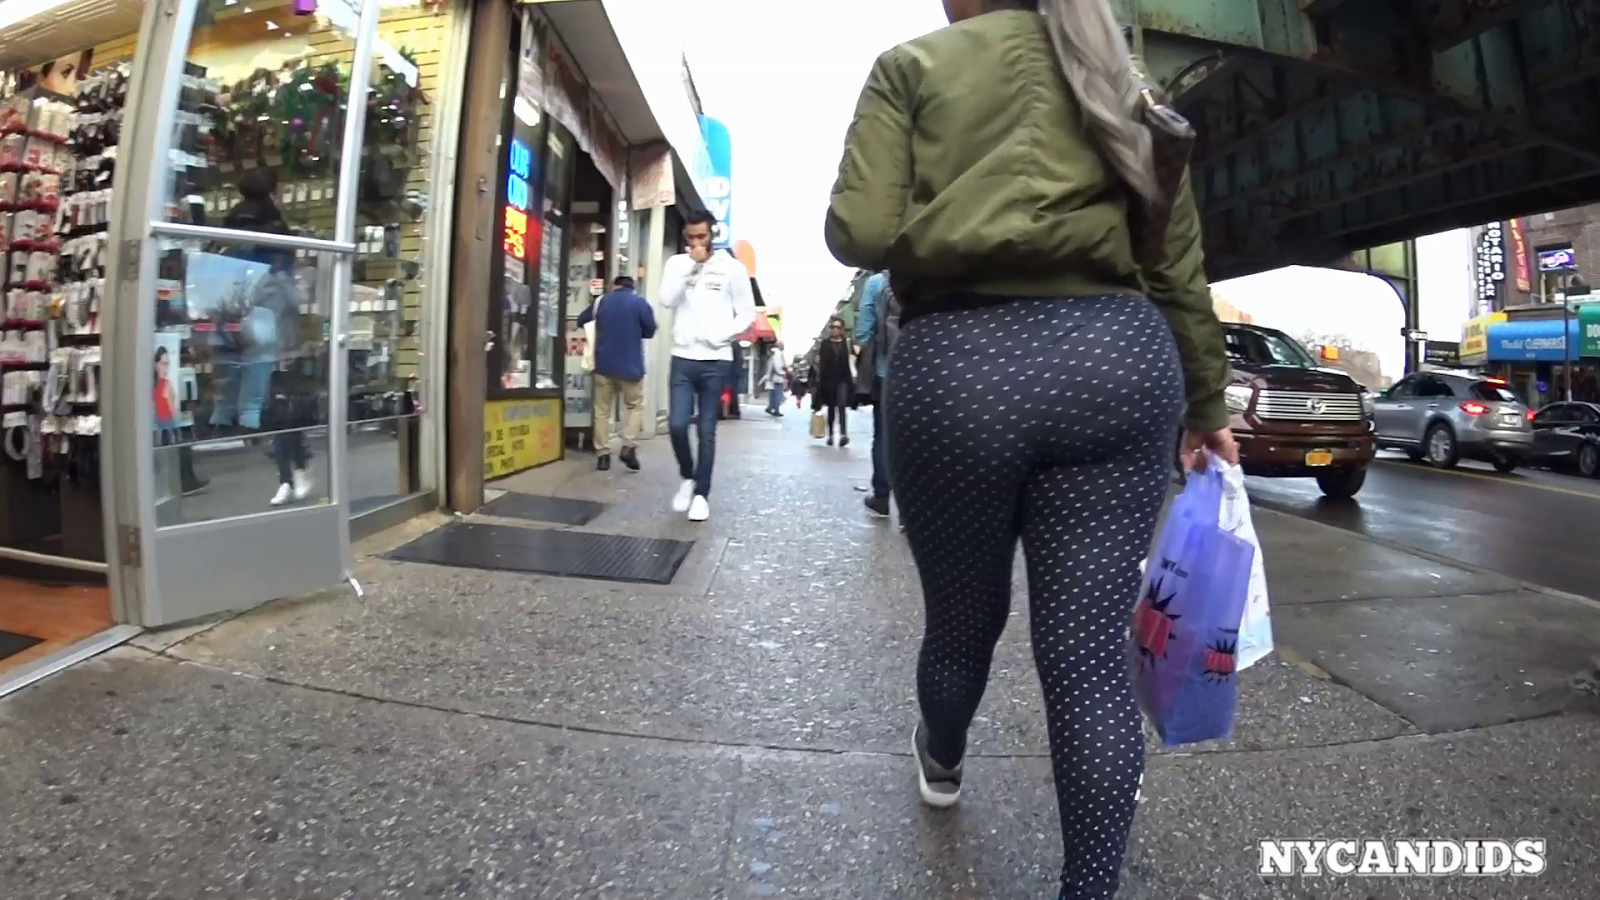 NYCandid 229 - ASSS ON LEGGINGS, A PERFECT MOMENT.